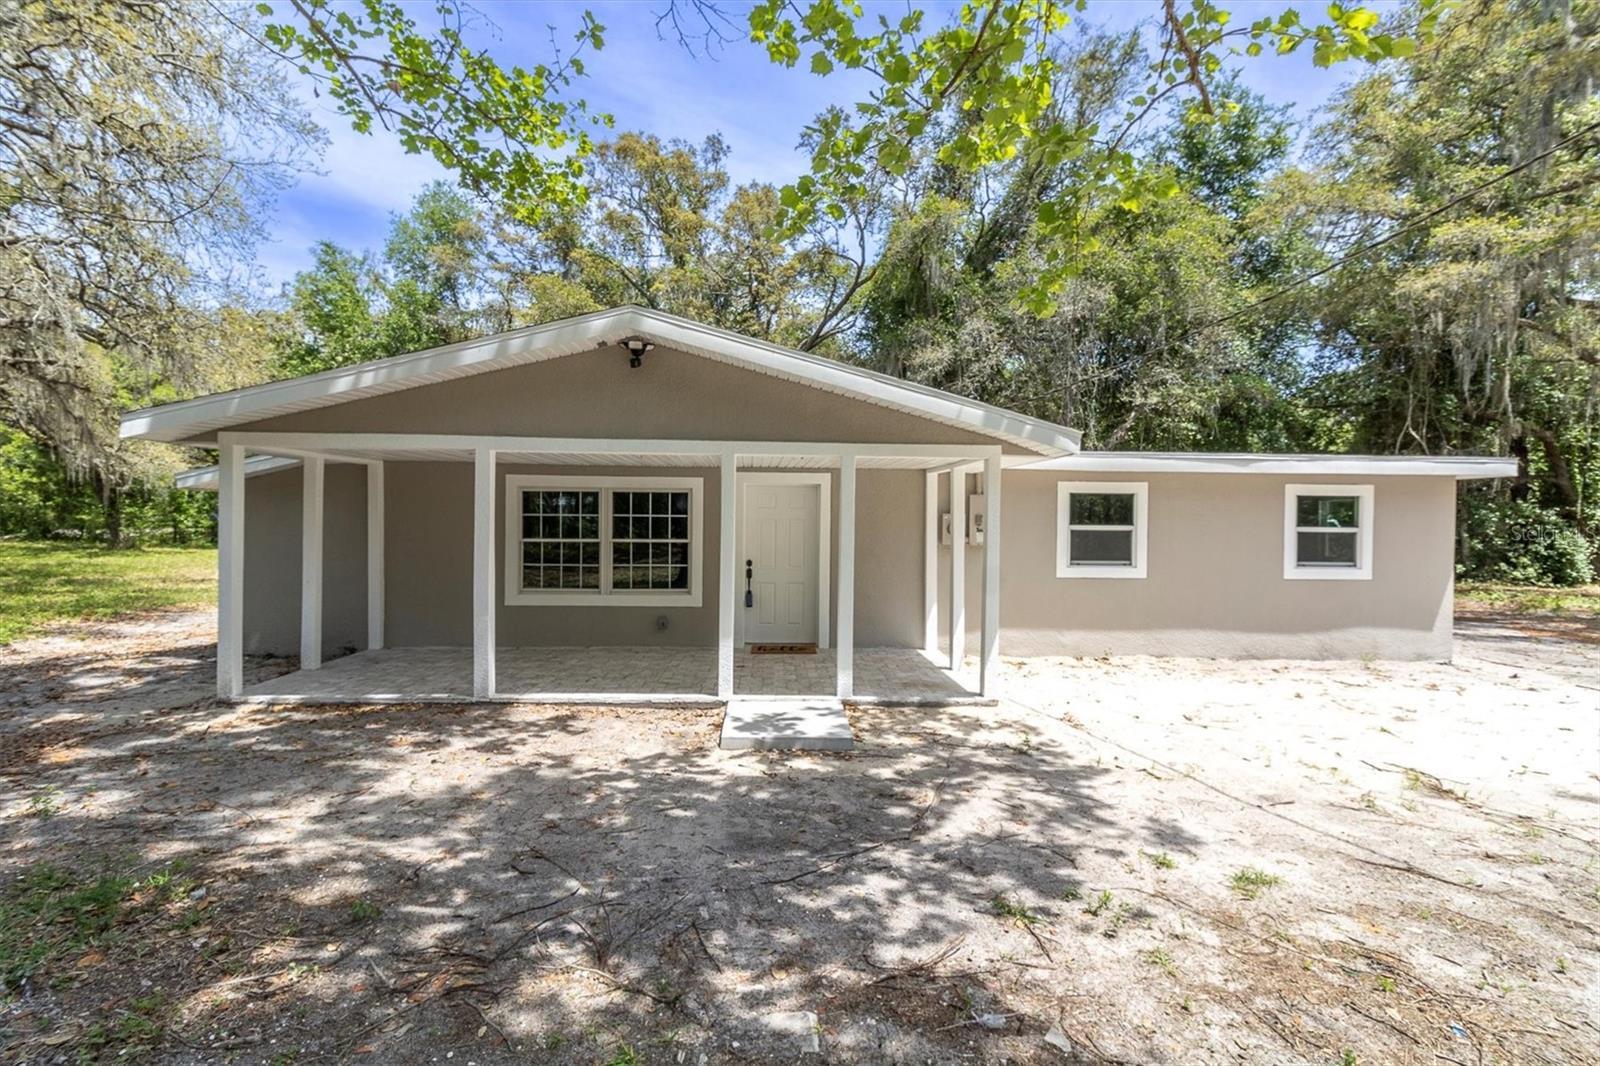 Photo one of 14308 Peace Blvd Spring Hill FL 34610 | MLS W7863733